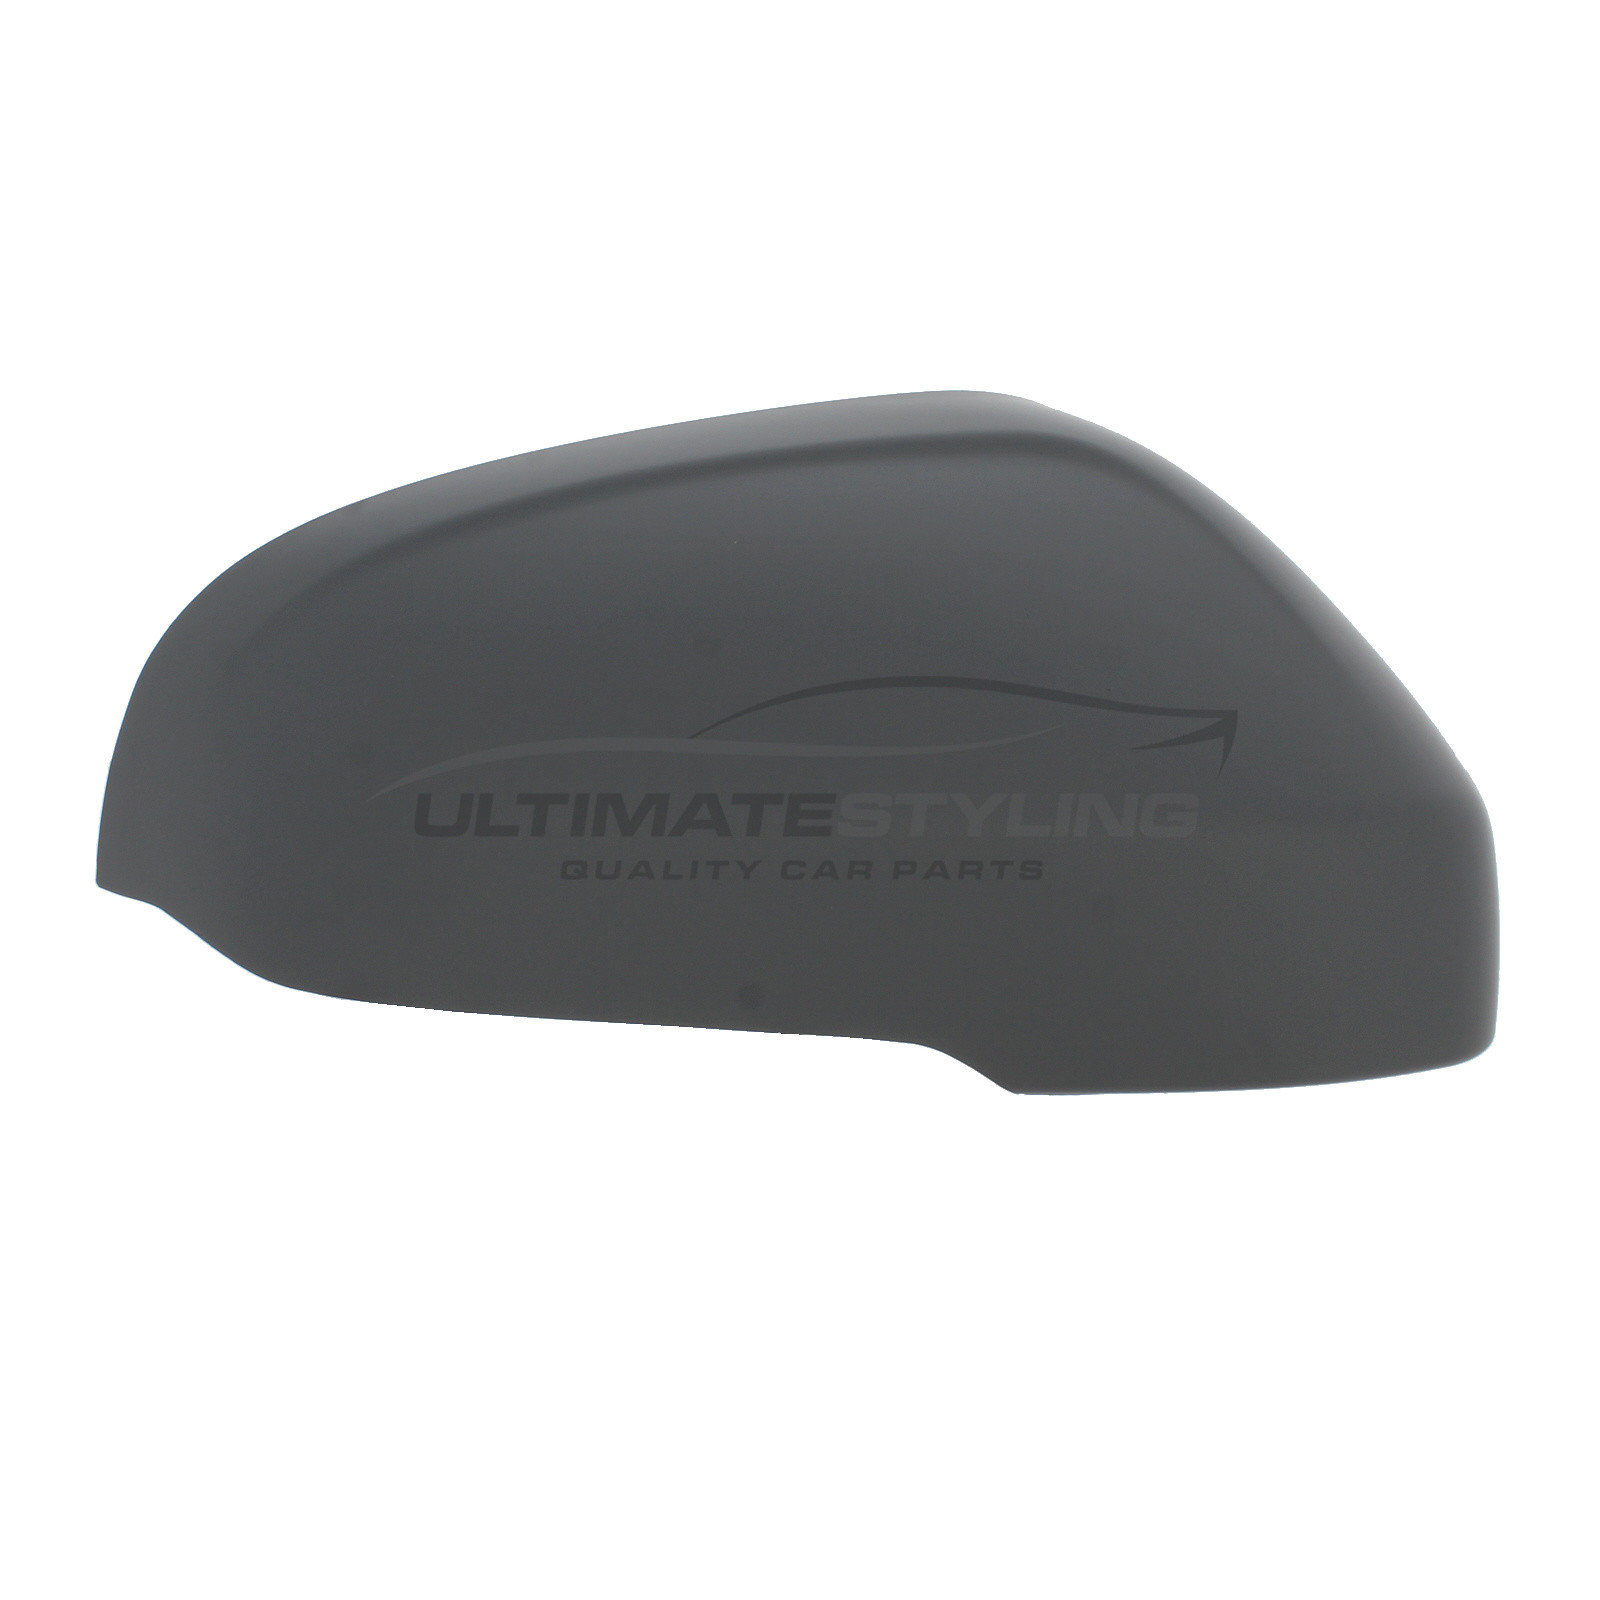 Volvo S60 2010-2019, Volvo S80 2010-2017, Volvo V40 2012-2020, Volvo V60 2010-2018, Volvo V70 2010-2017 Wing Mirror Cover Cap Casing Primed Drivers Side (RH)